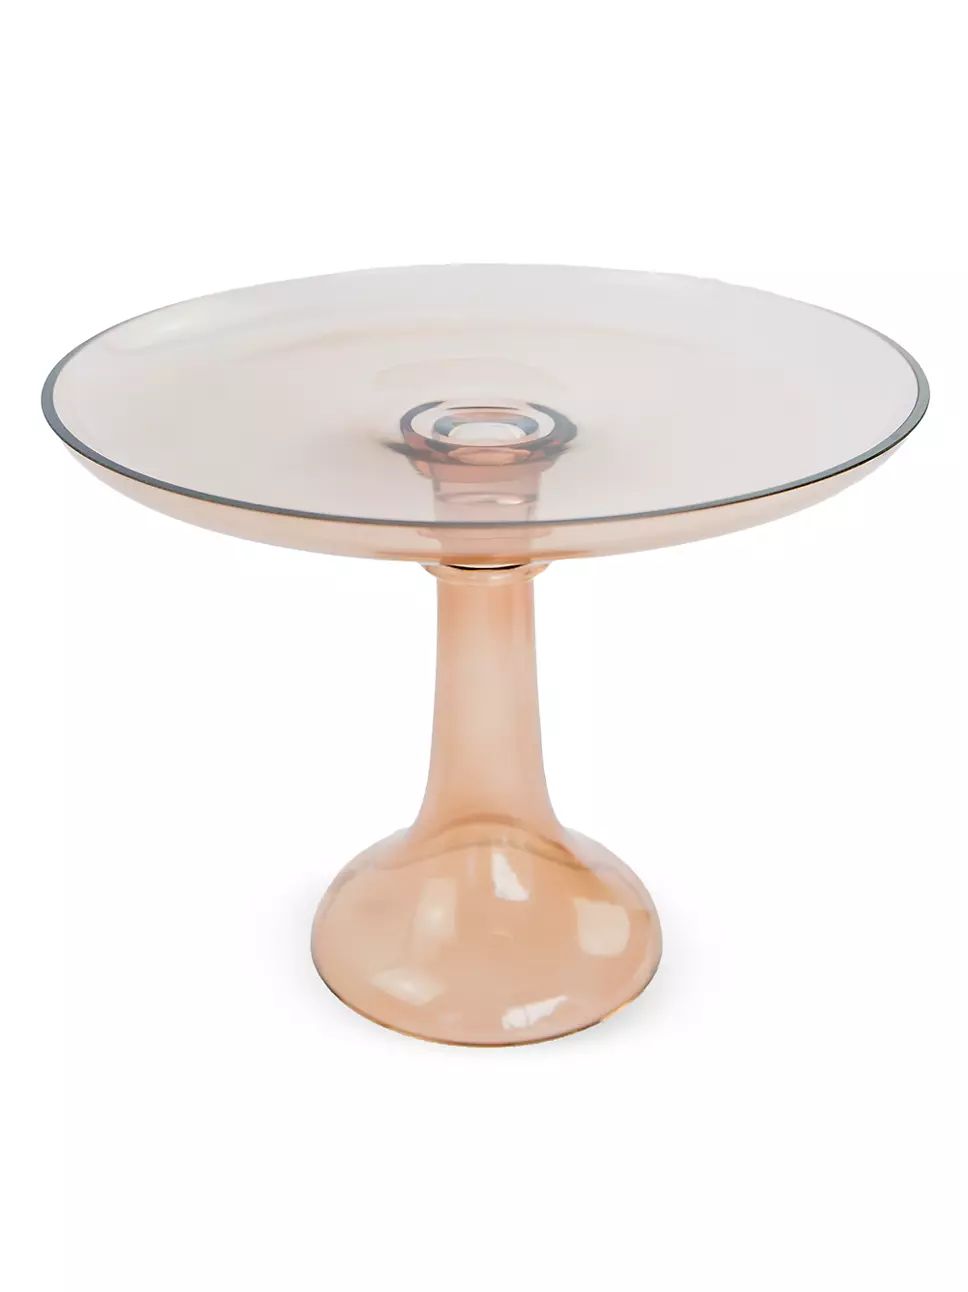 Glass Cake Stand | Saks Fifth Avenue